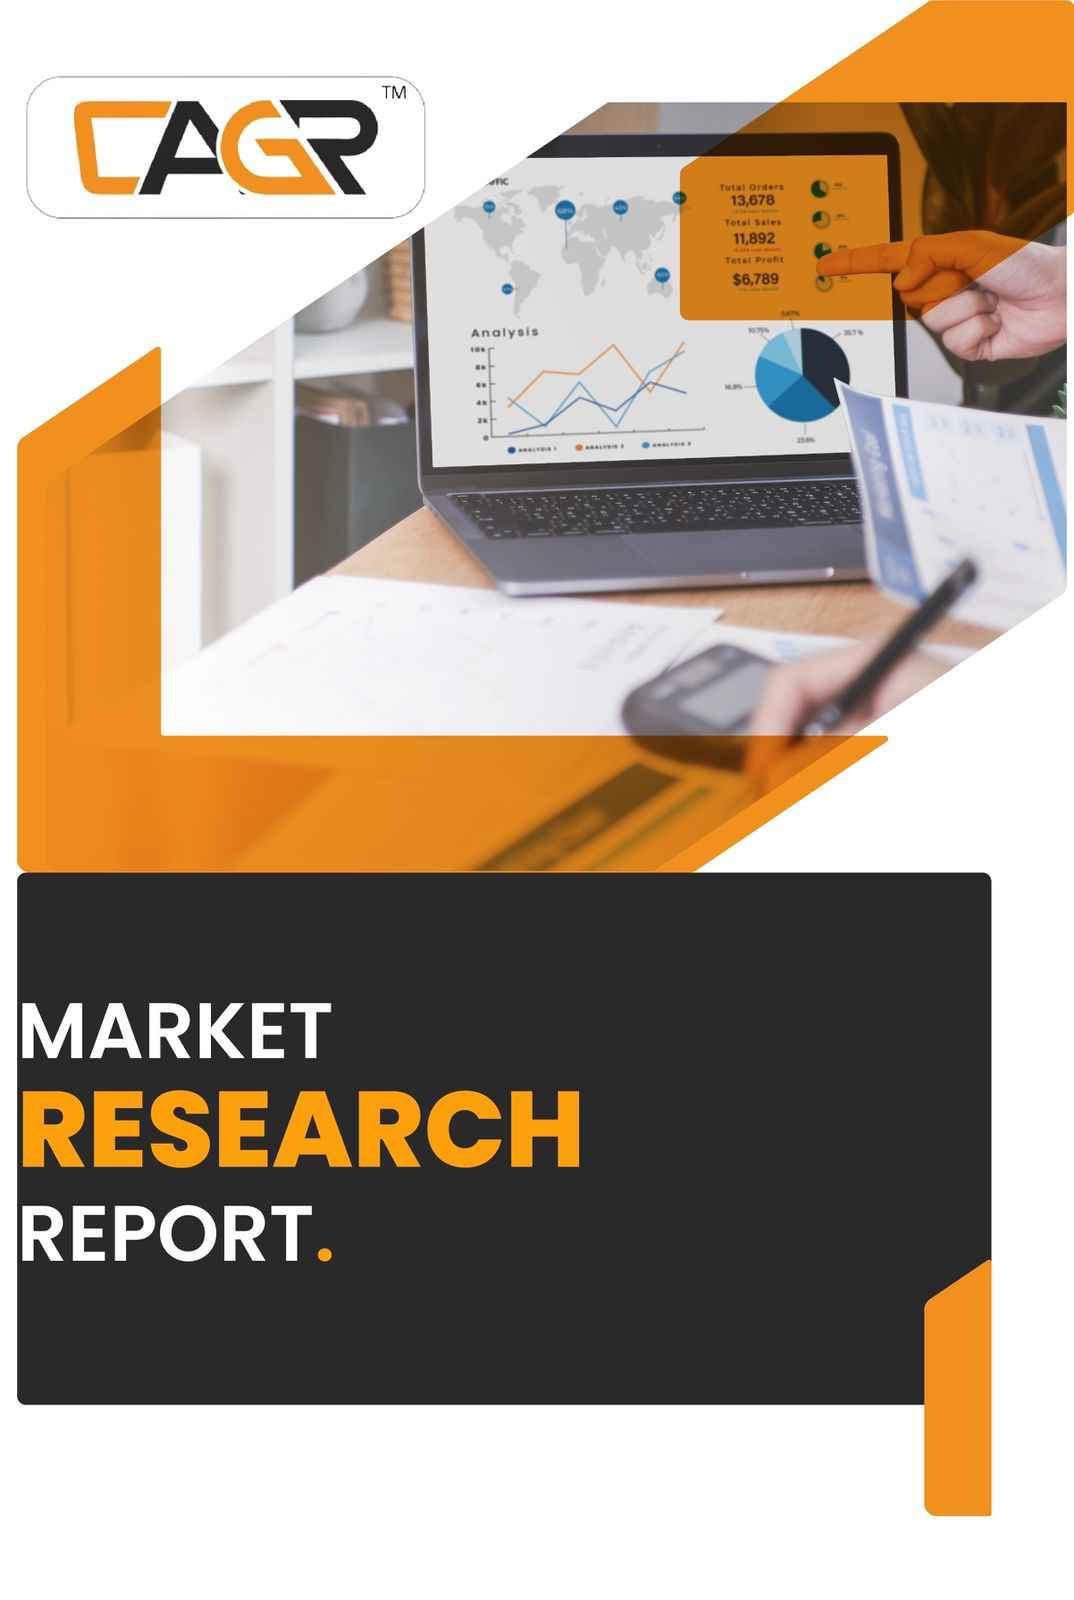 Global VVT & Start-Stop Systems Market Status, Trends and COVID-19 Impact Report 2022